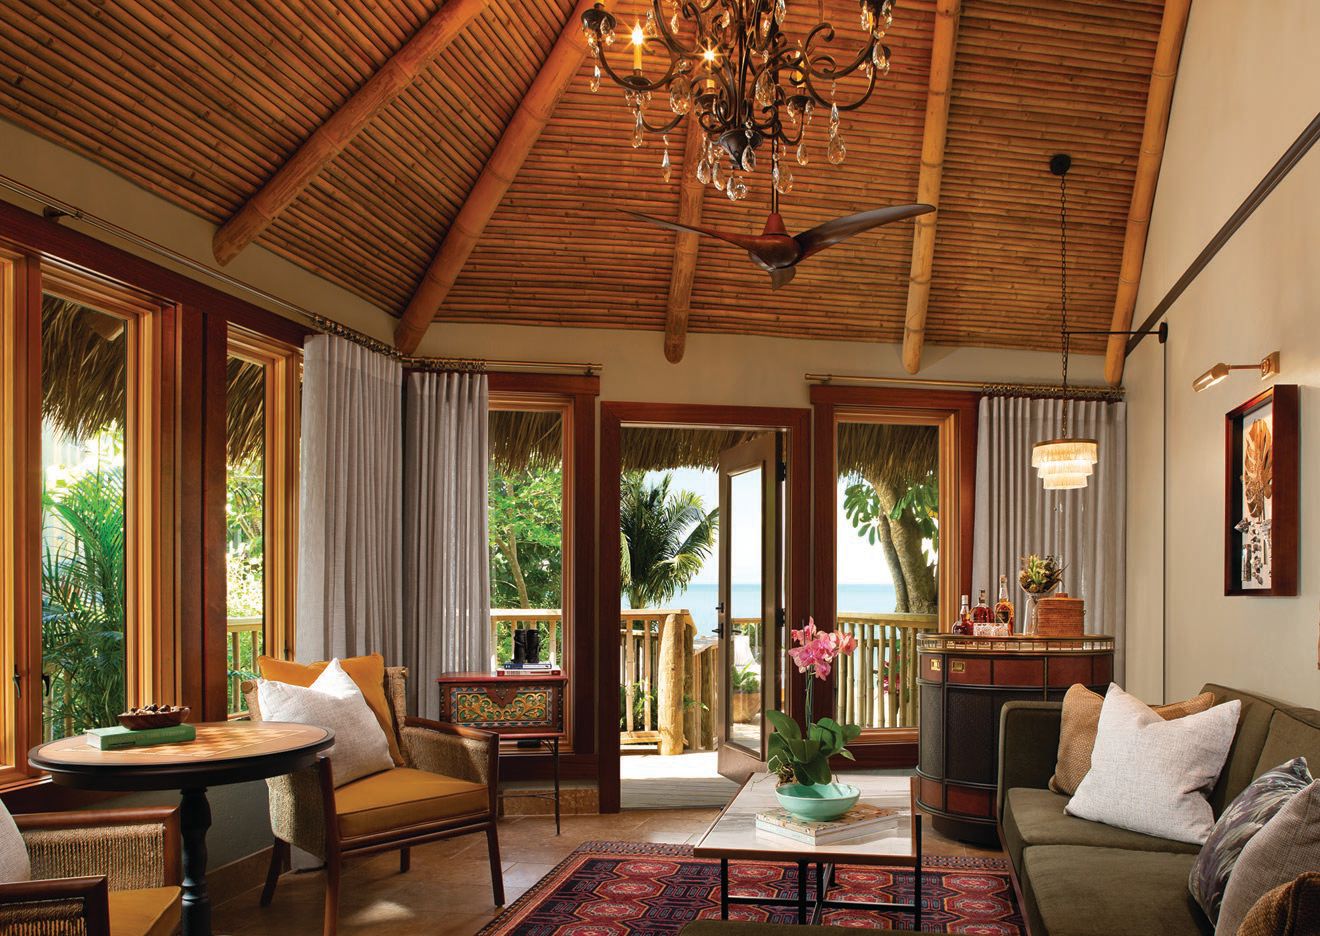 Vaulted ceilings and British West Indies-inspired decor make for alluring accommodations PHOTO COURTESY OF LITTLE PALM ISLAND RESORT & SPA